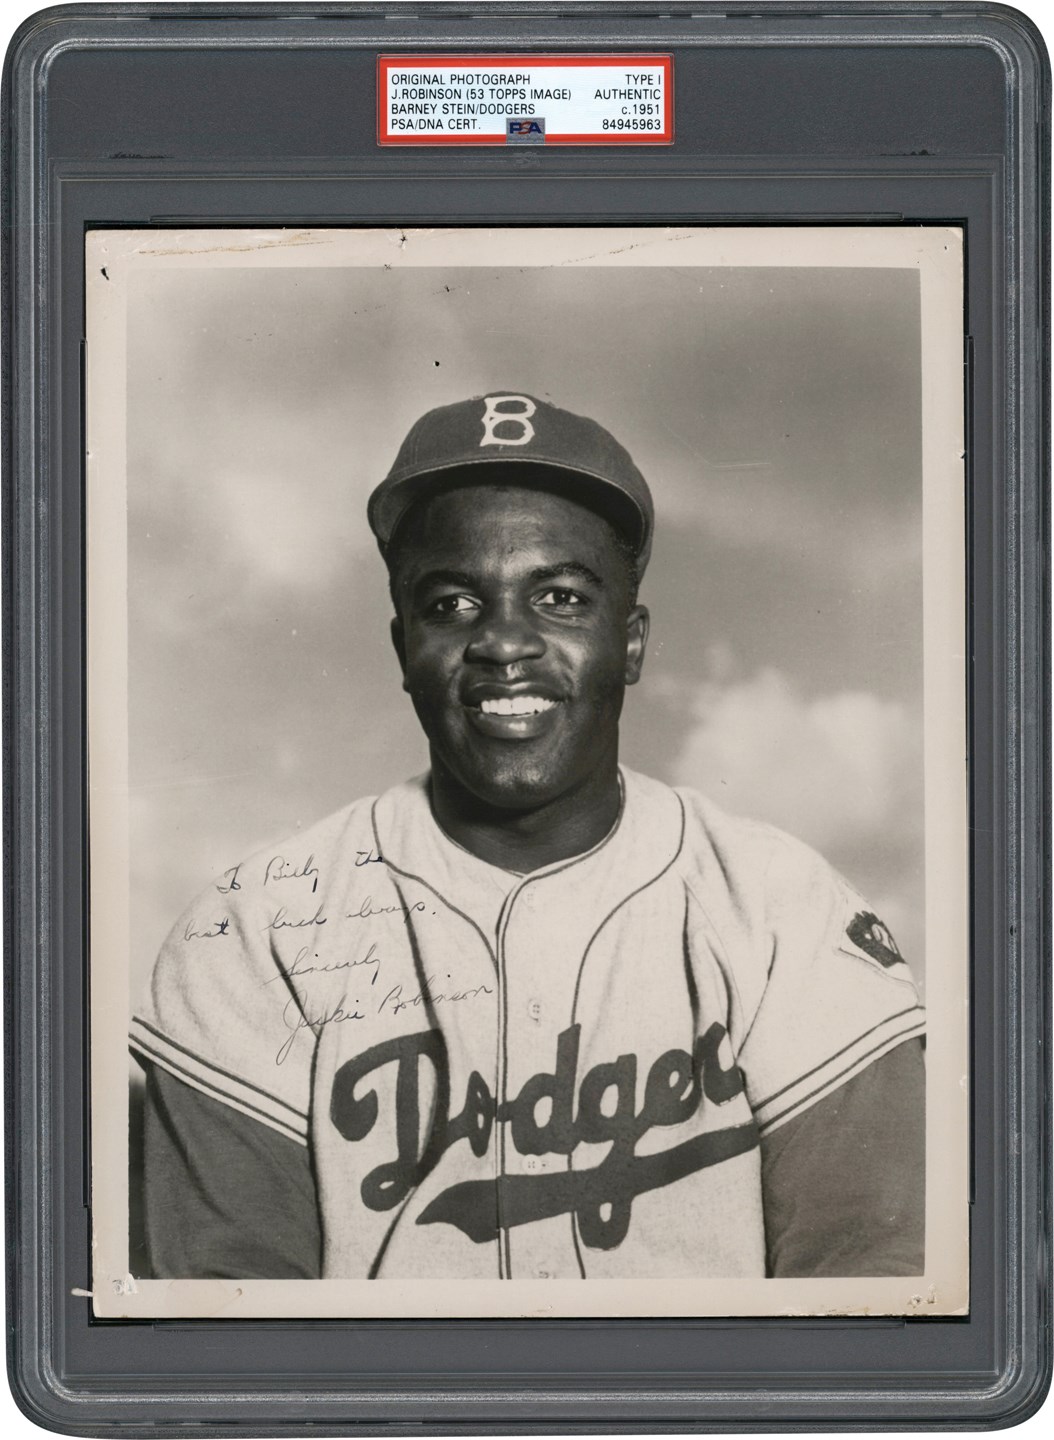 rca 1951 Jackie Robinson Signed Original Photograph Used for 1953 Topps Card to Teammate Billy Cox (PSA Type I)